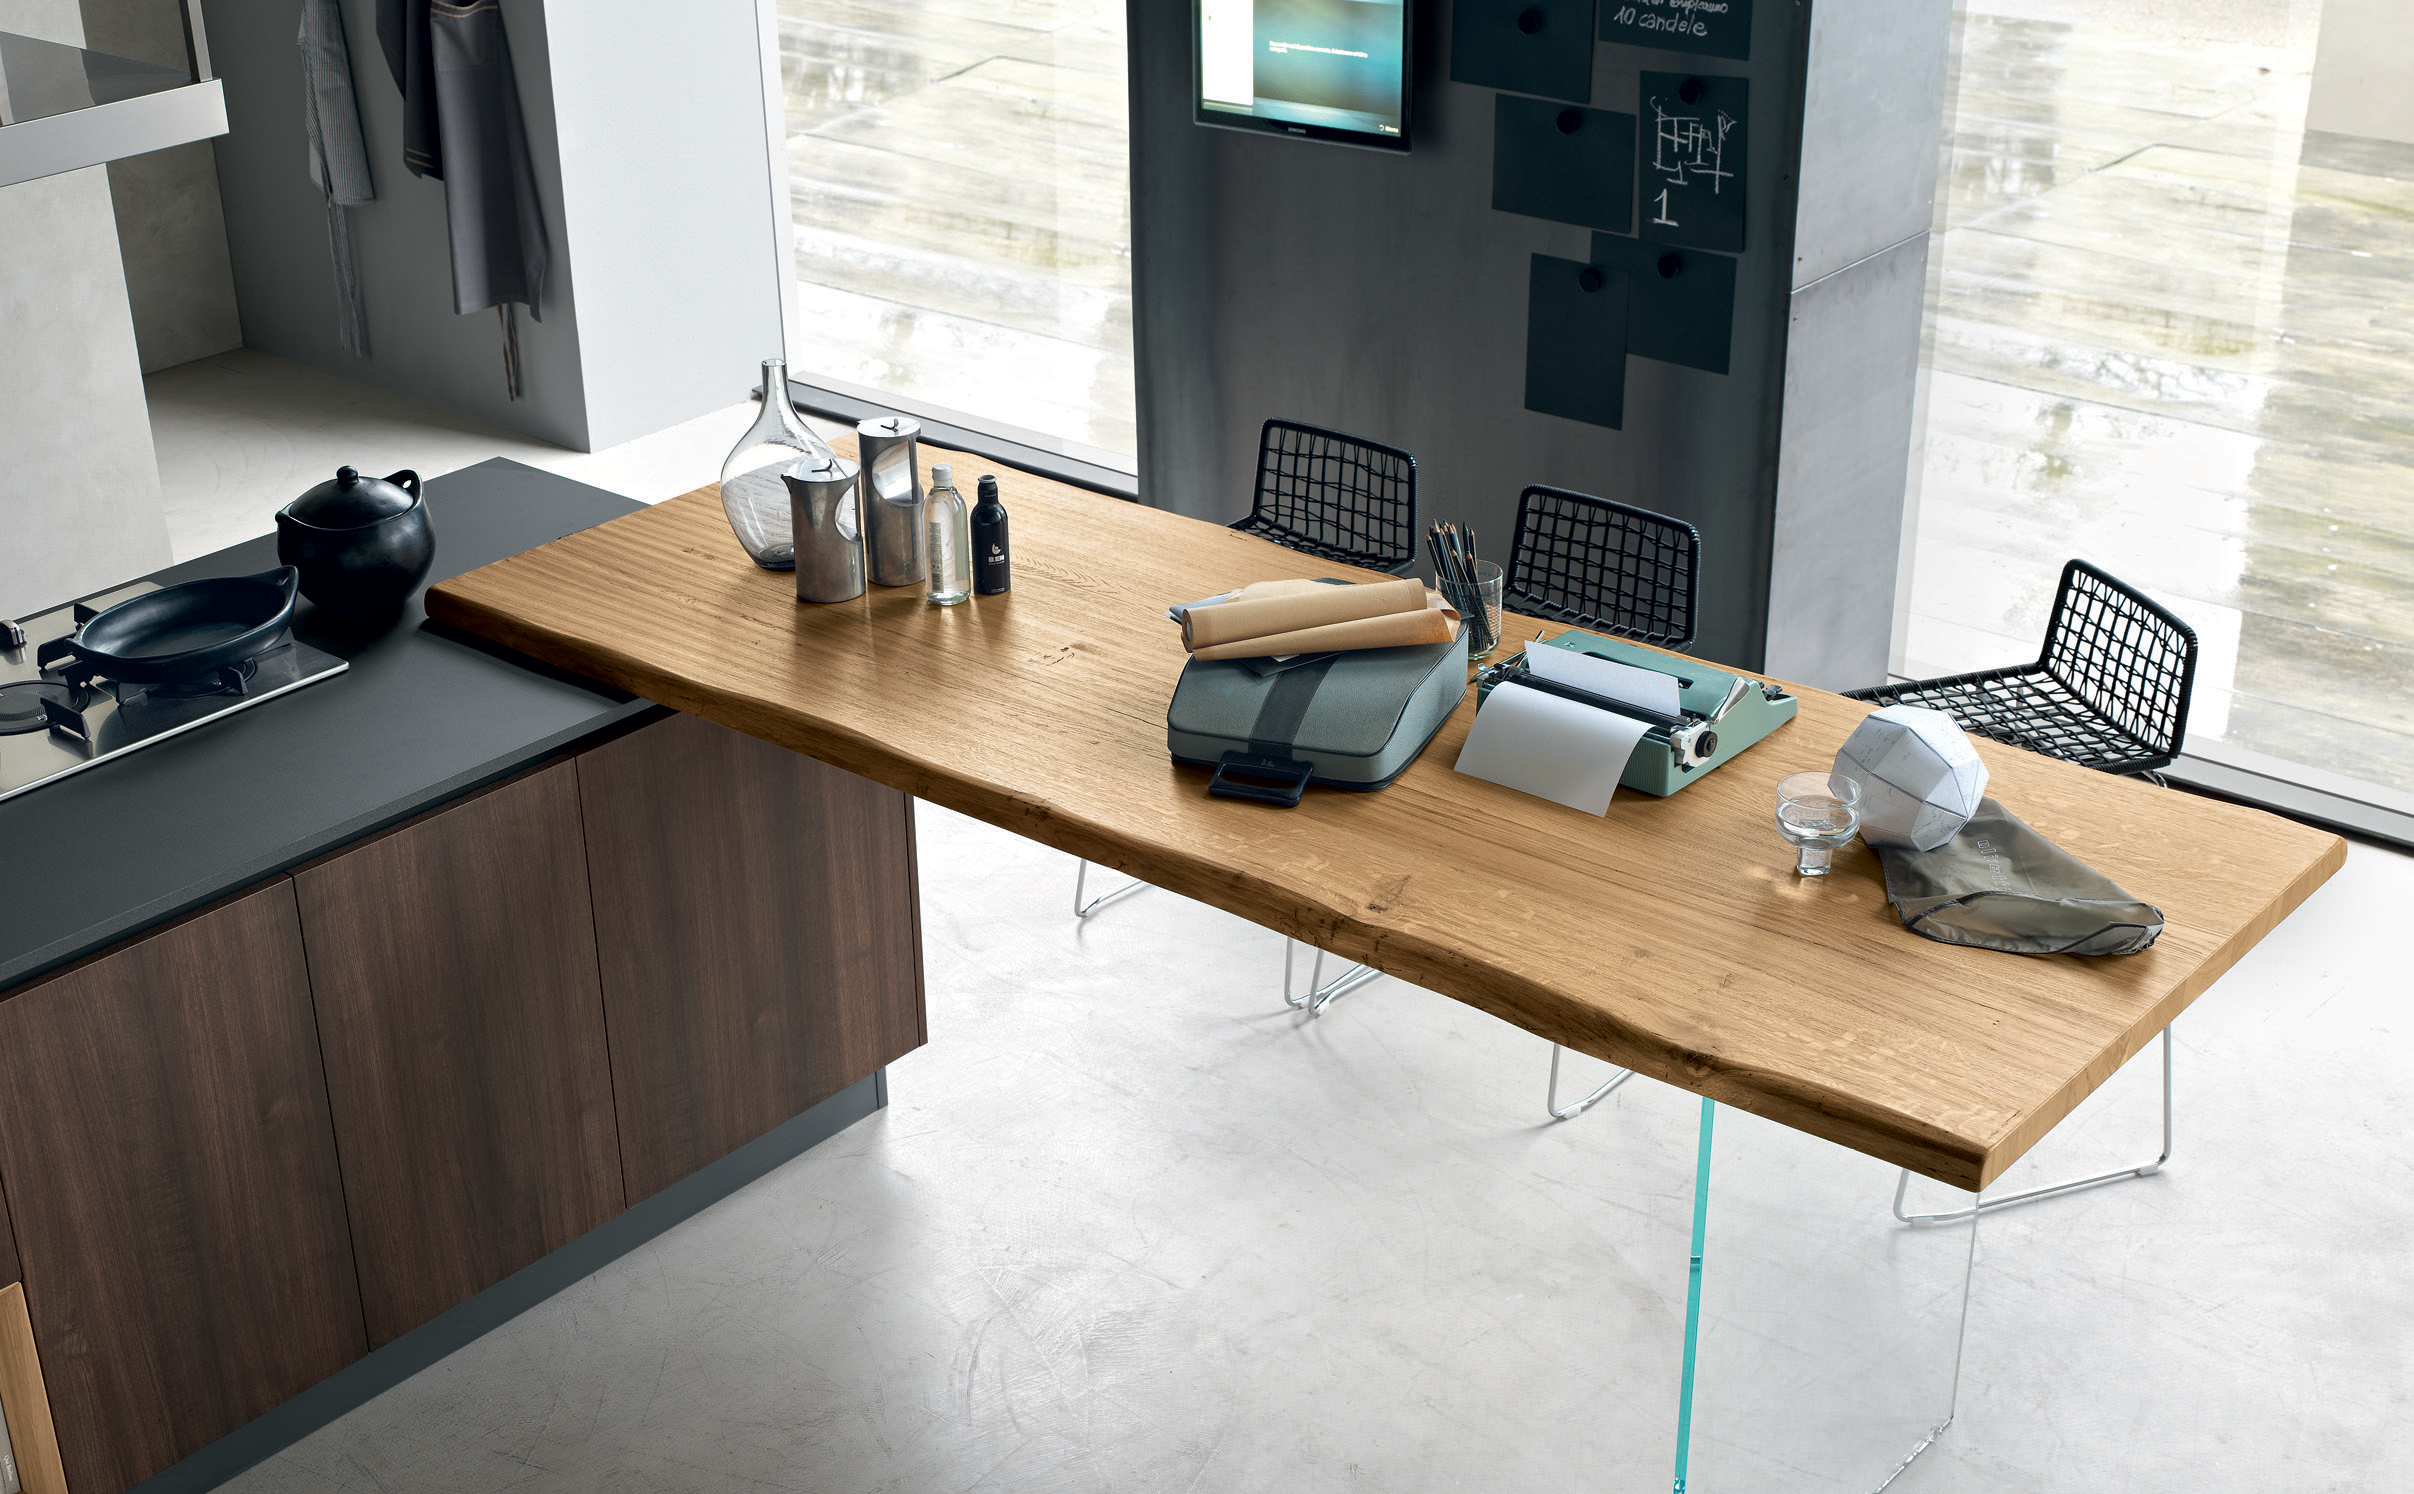  In a natural versions, the wood characterizes the counter and plays with the overlap. It creates a furnishing harmony throughout the composition, which is brought out even more by the elegance of the adjustable glass table leg.&nbsp;&nbsp; 